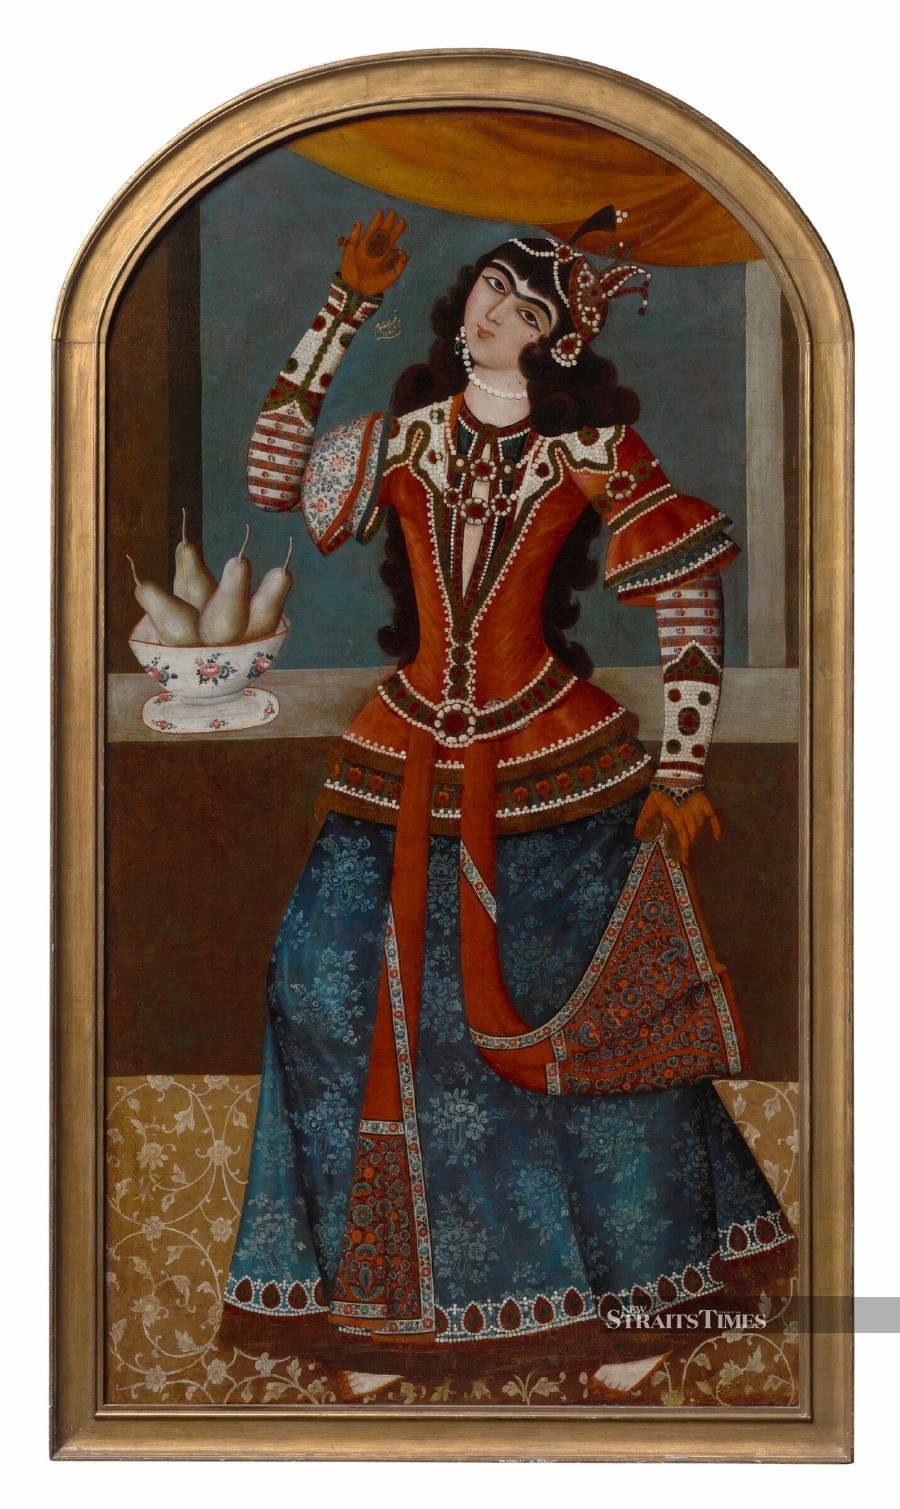  A painting by the Qajar artist Muhammad Baqir, 1778 to 79, oil on canvas (from The Museum of Fine Arts, Houston).